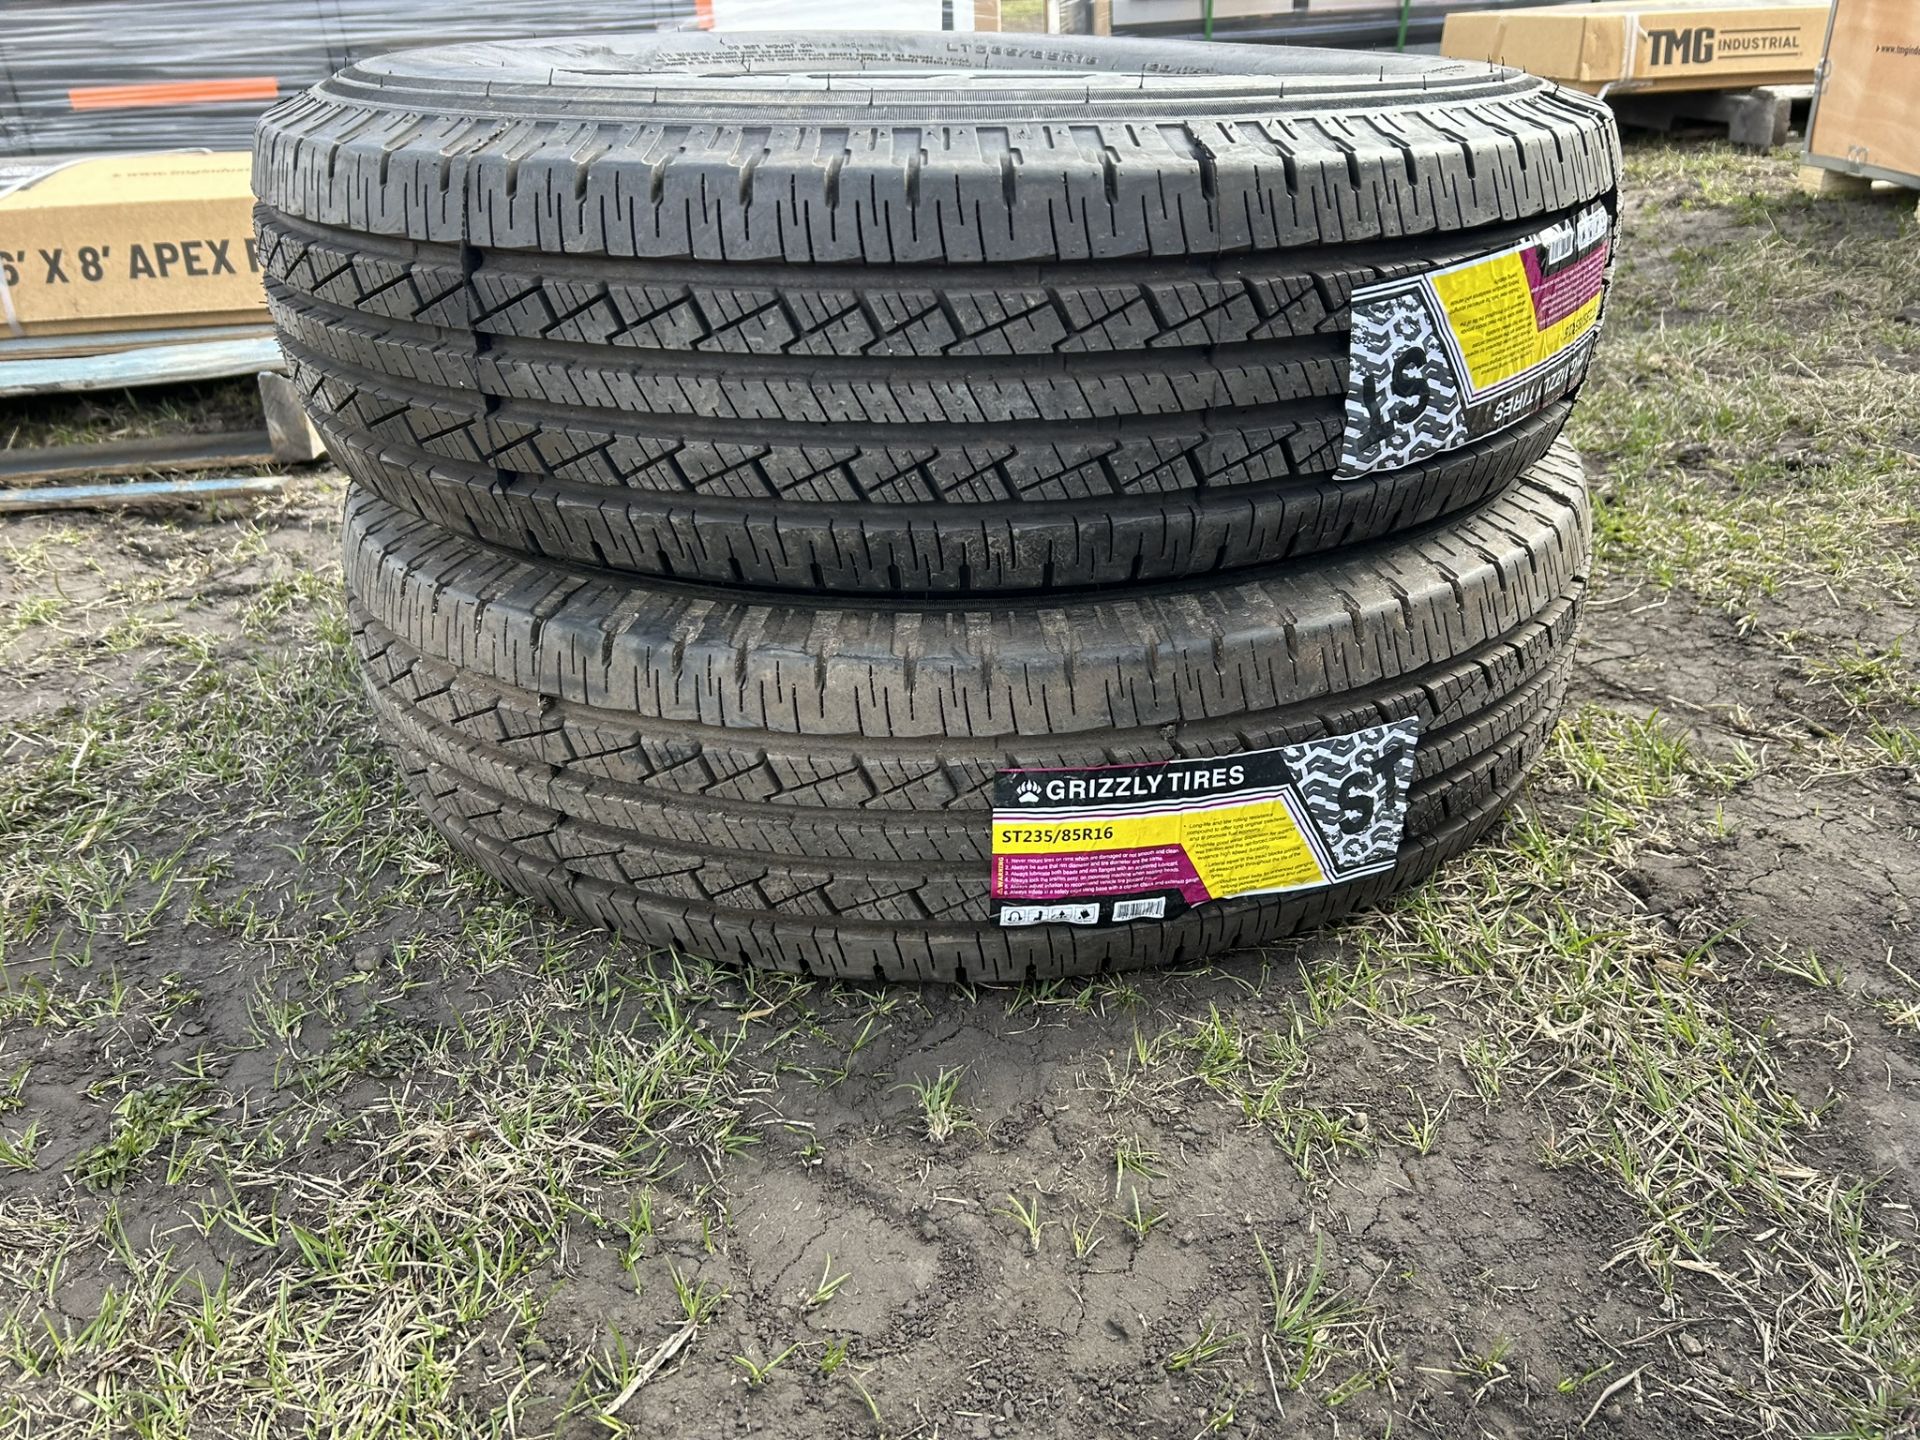 2 - GRIZZLY ST-235/85R16-10PR TRAILER TIRES W/ 8 BOLT RIMS (TIMES THE MONEY X2) - Image 2 of 4